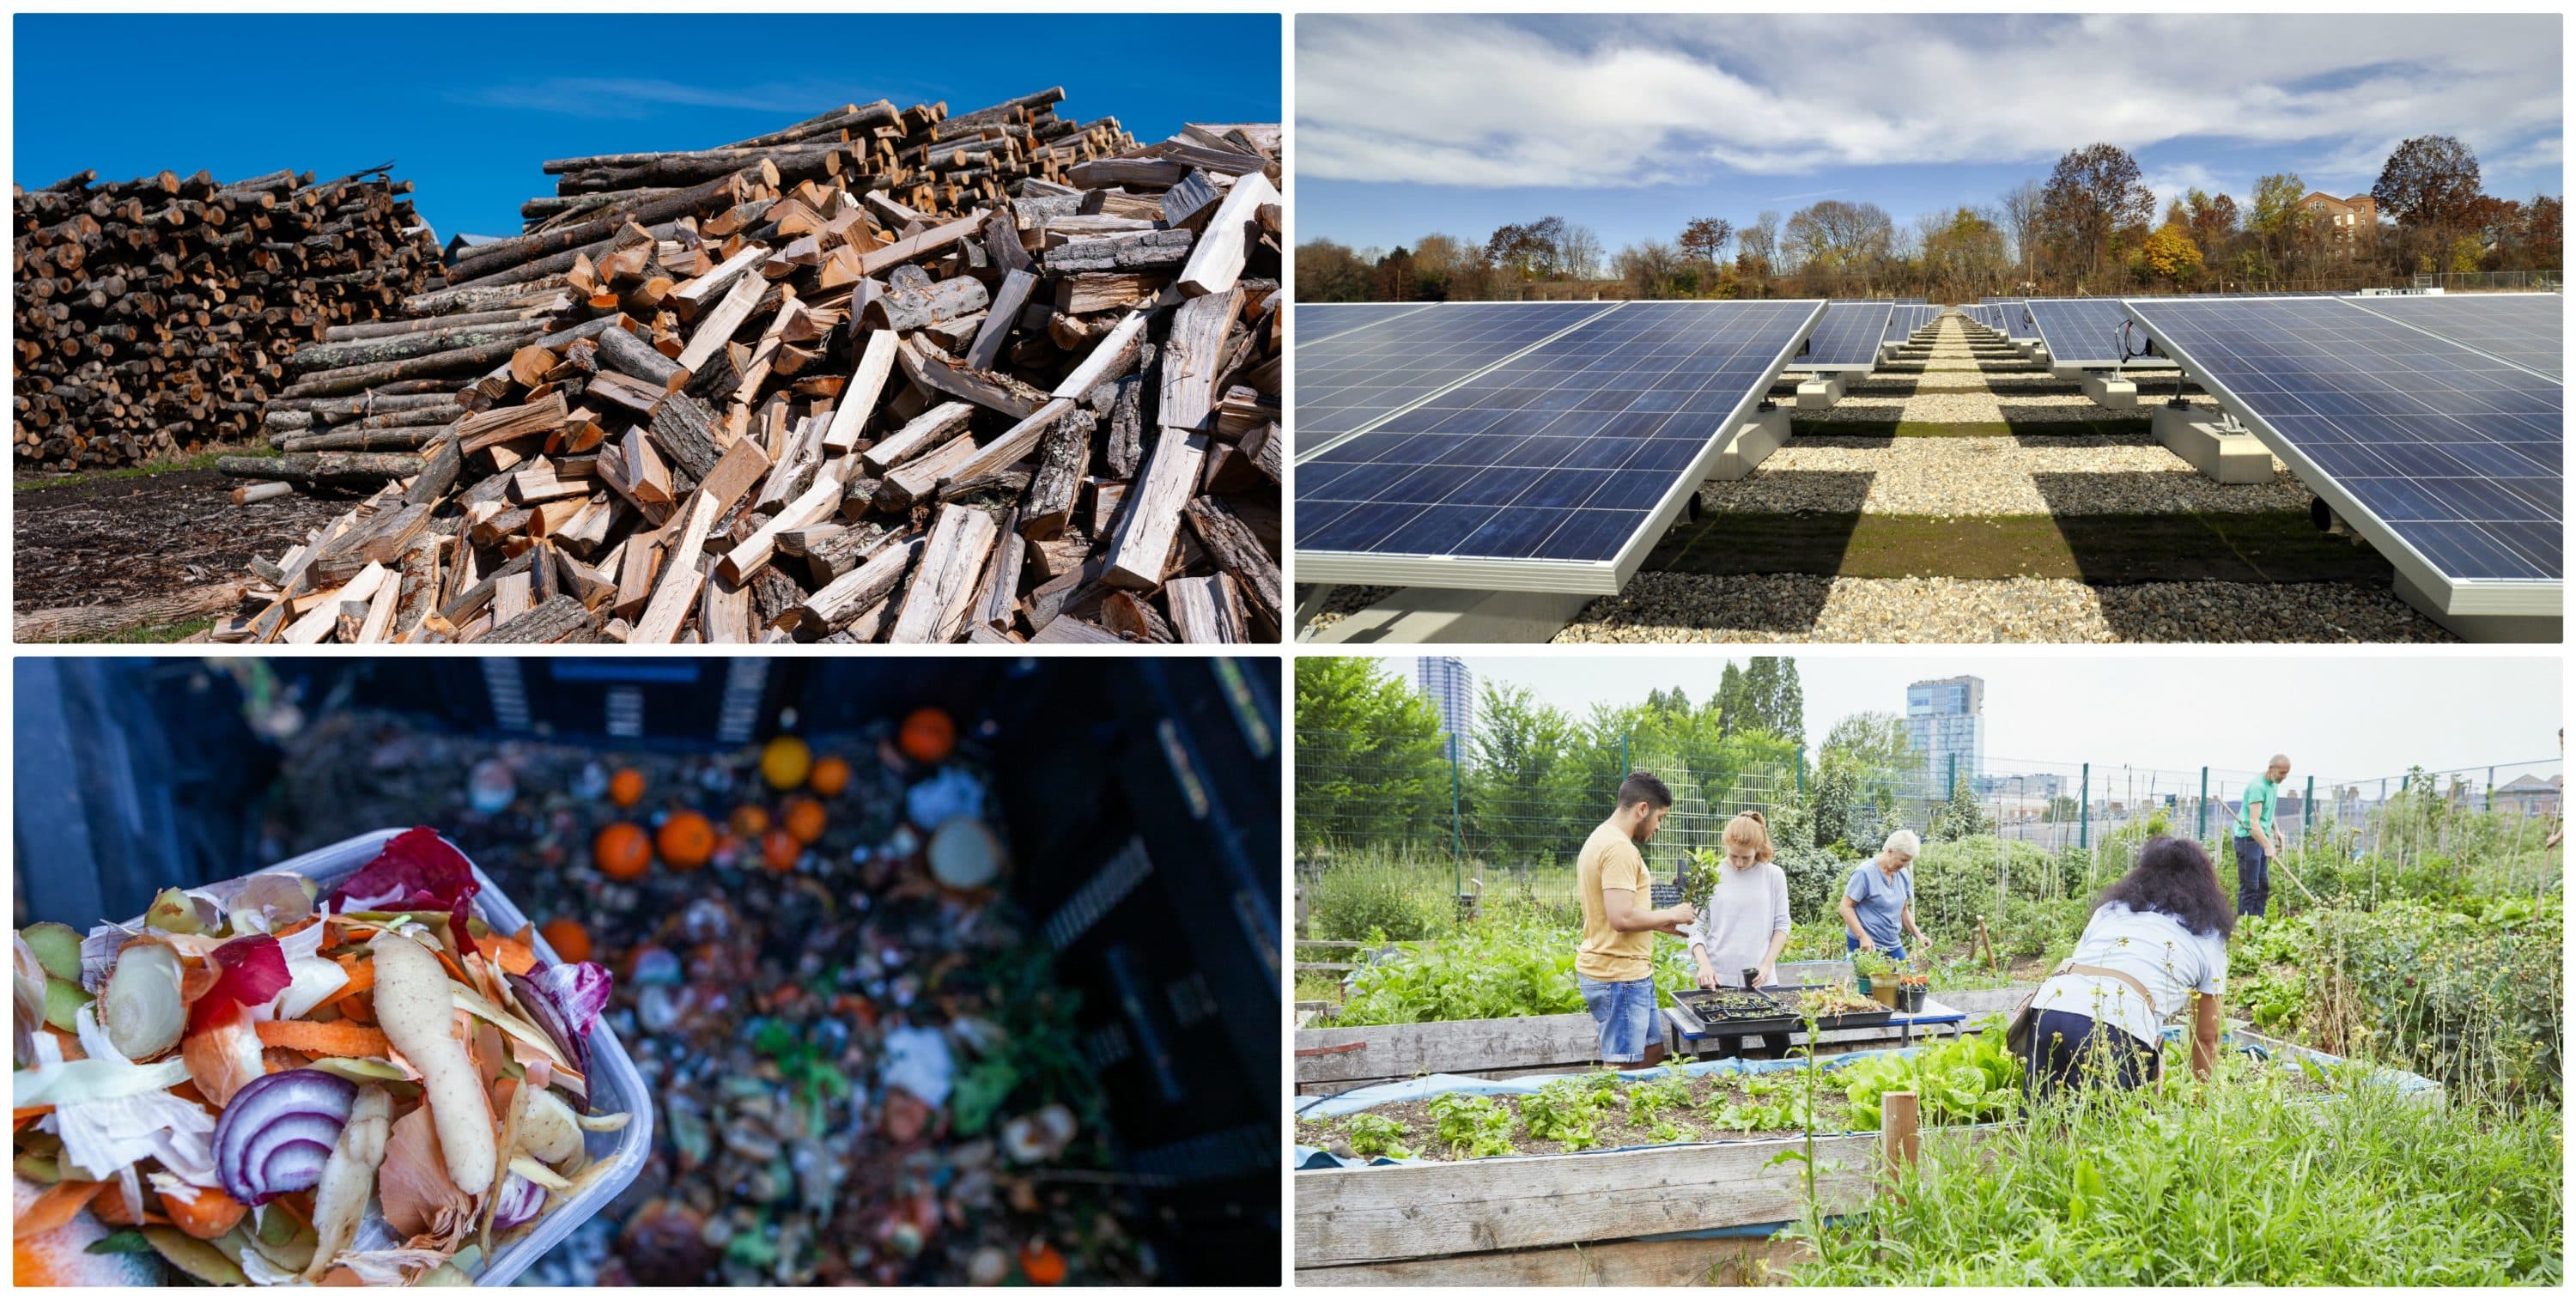 Clockwise from top left, hardwood logs in Charlotte, Vermont in 2020; solar panels in Pittsfield, Mass. in 2010; a group of volunteers work in a community garden; compostable food (AP Images; Getty Images; and Compassionate Eye Foundation/Natasha Alipour Faridani via Getty Images)